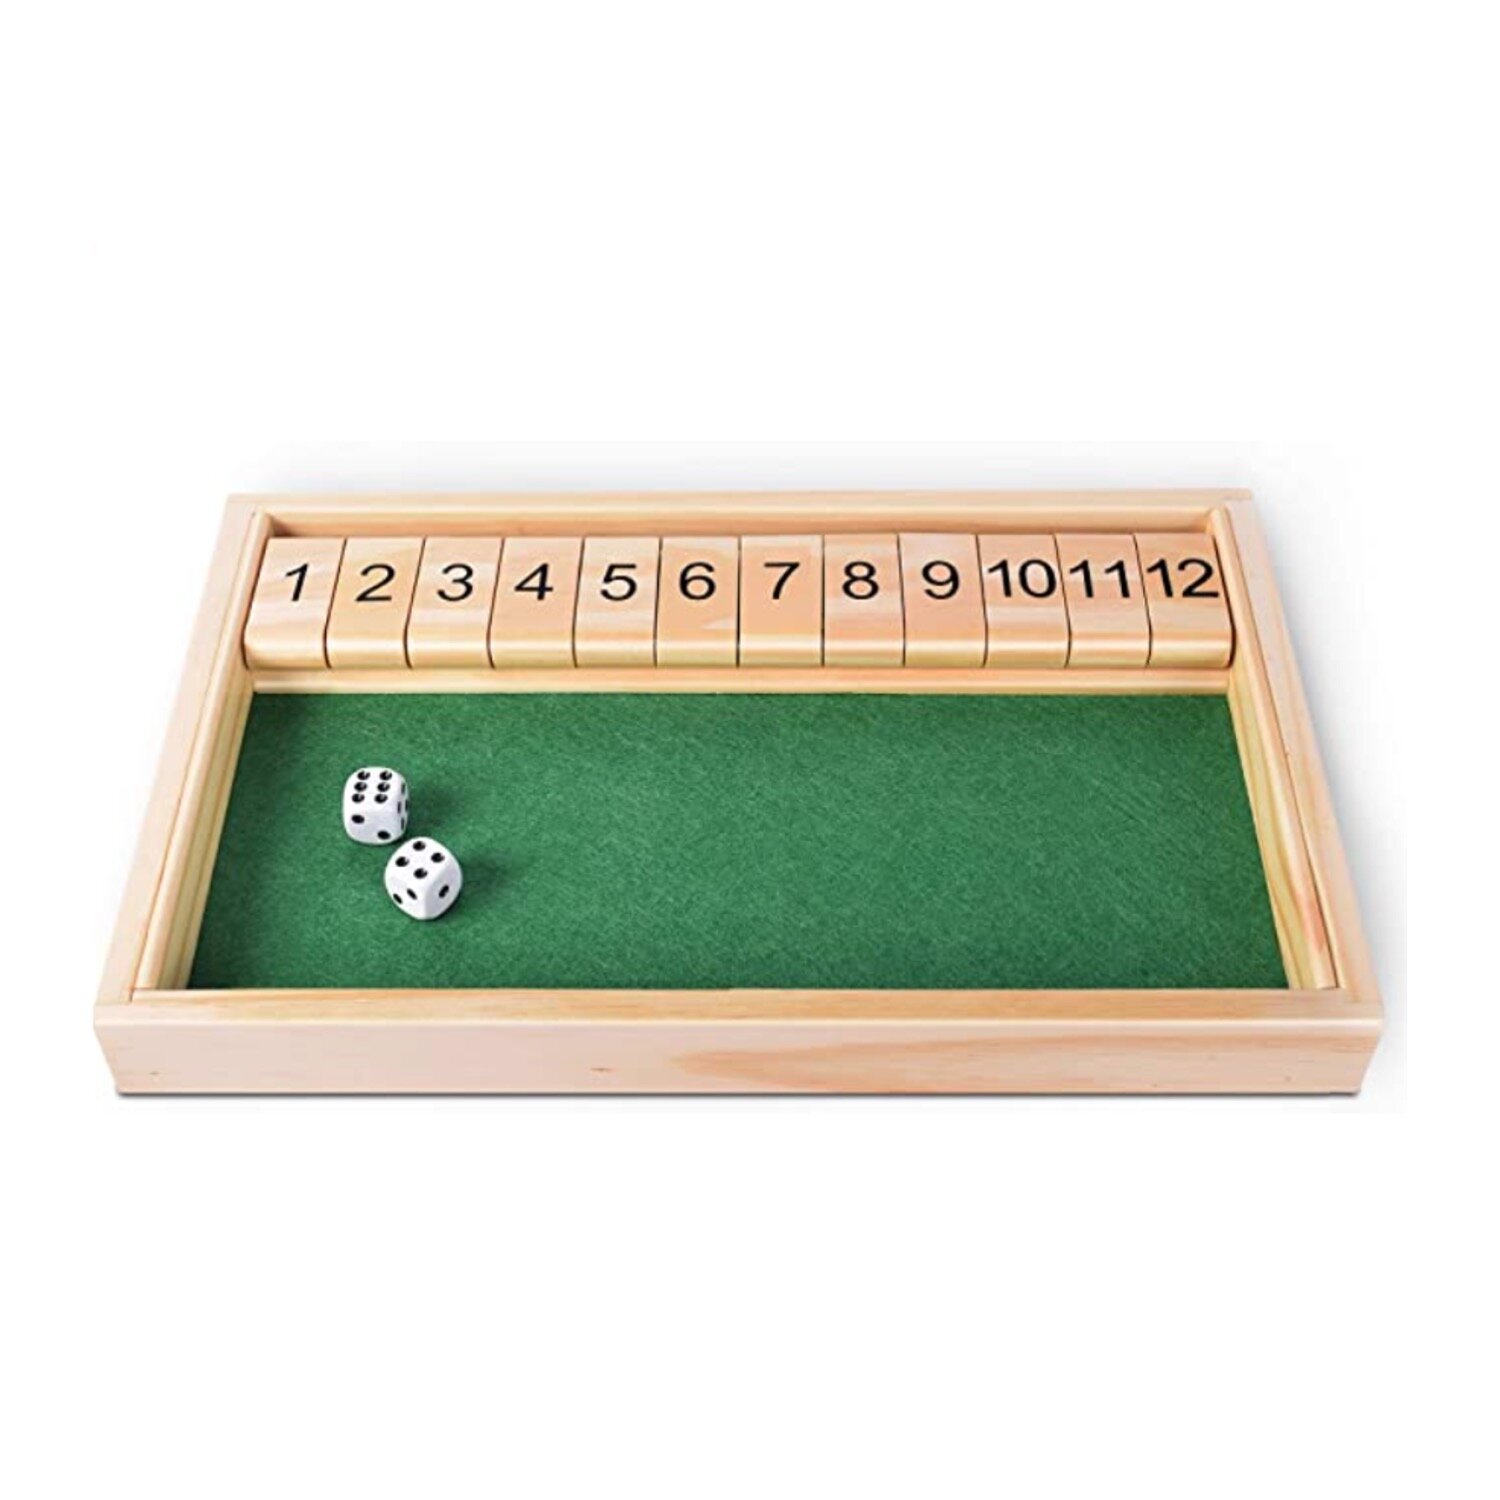  Shut The Box Game, 4-Player Wooden dice Game That's Perfect for  Parties and Gatherings. It enhances Math and Decision-Making Skills While  Providing Endless Entertainment. : Toys & Games